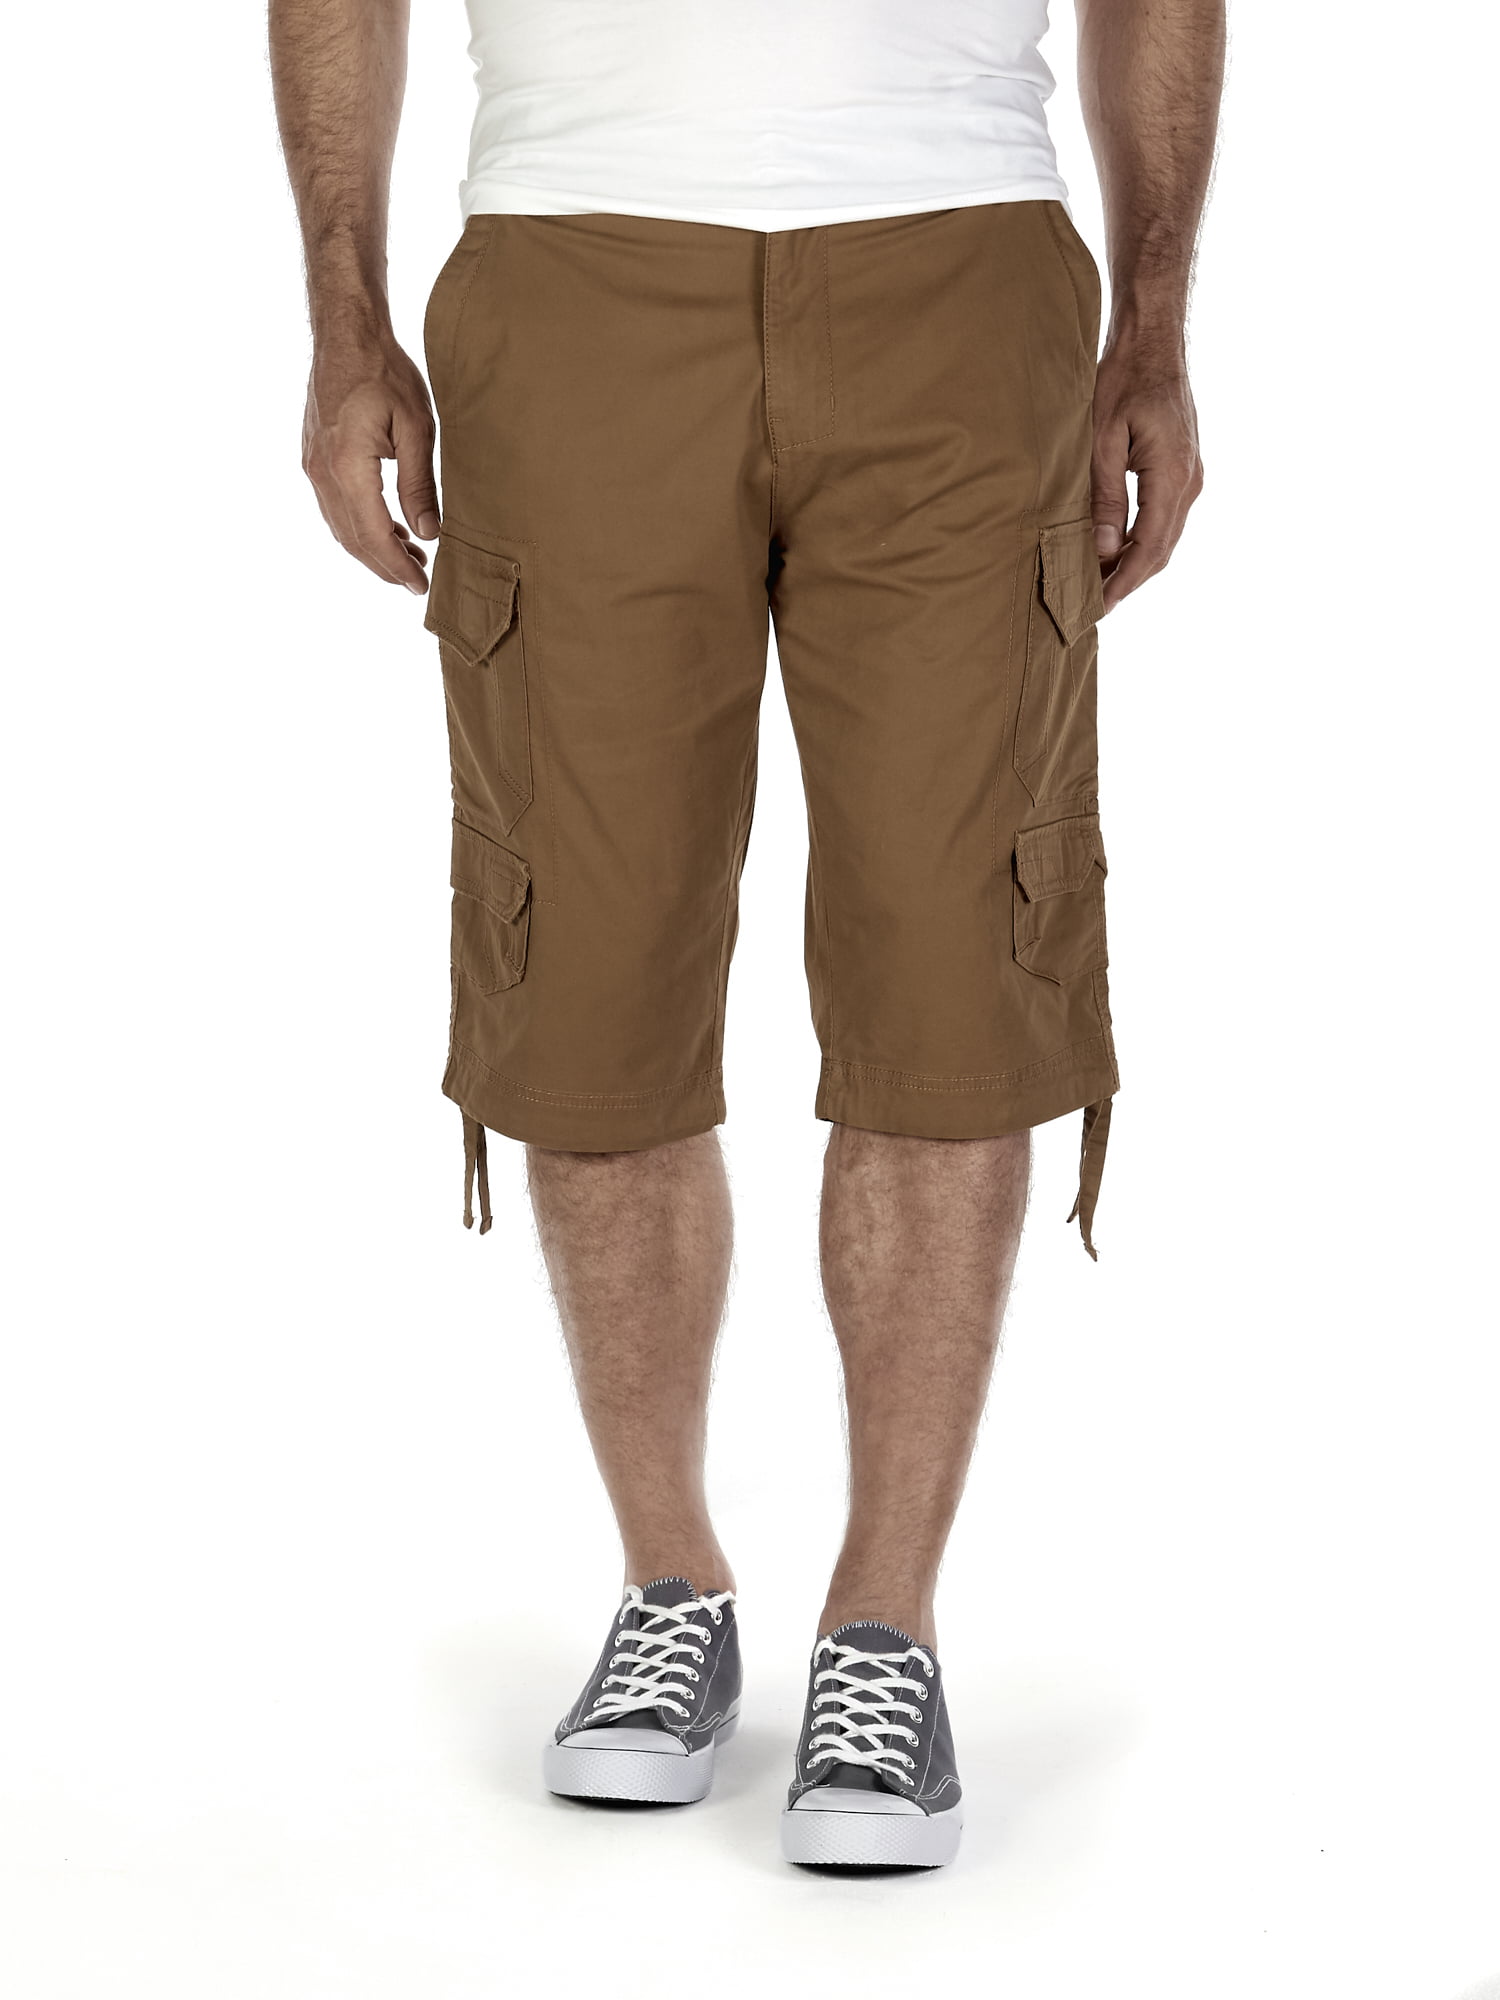 NEW GEORGE MEN'S  CARGO SHORT AT THE KNEE STRETCH  BEIGE FREE SHIPPING 